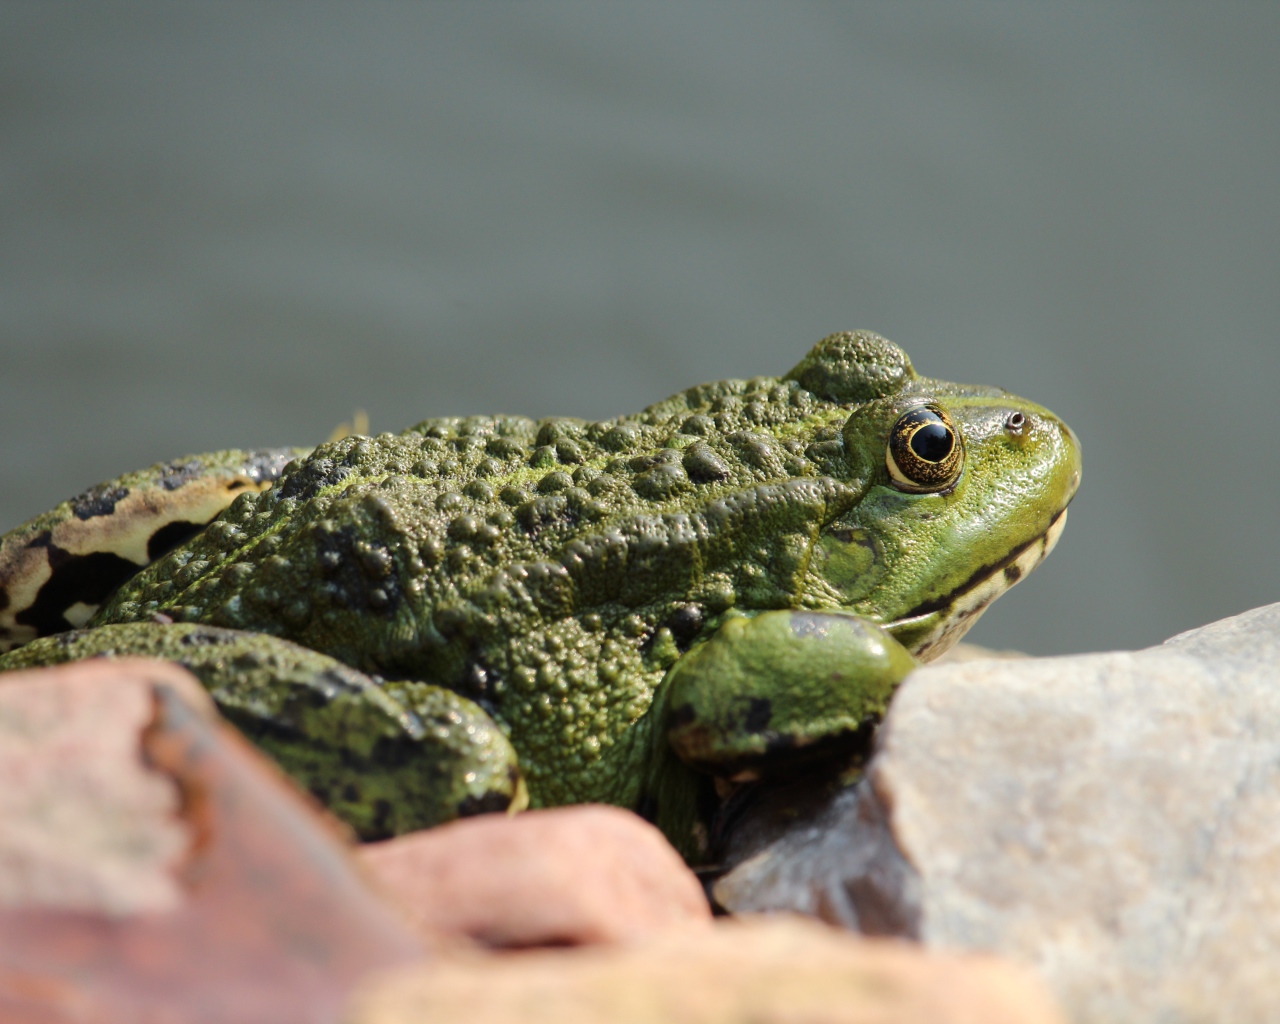 Big green toad sitting on a stone